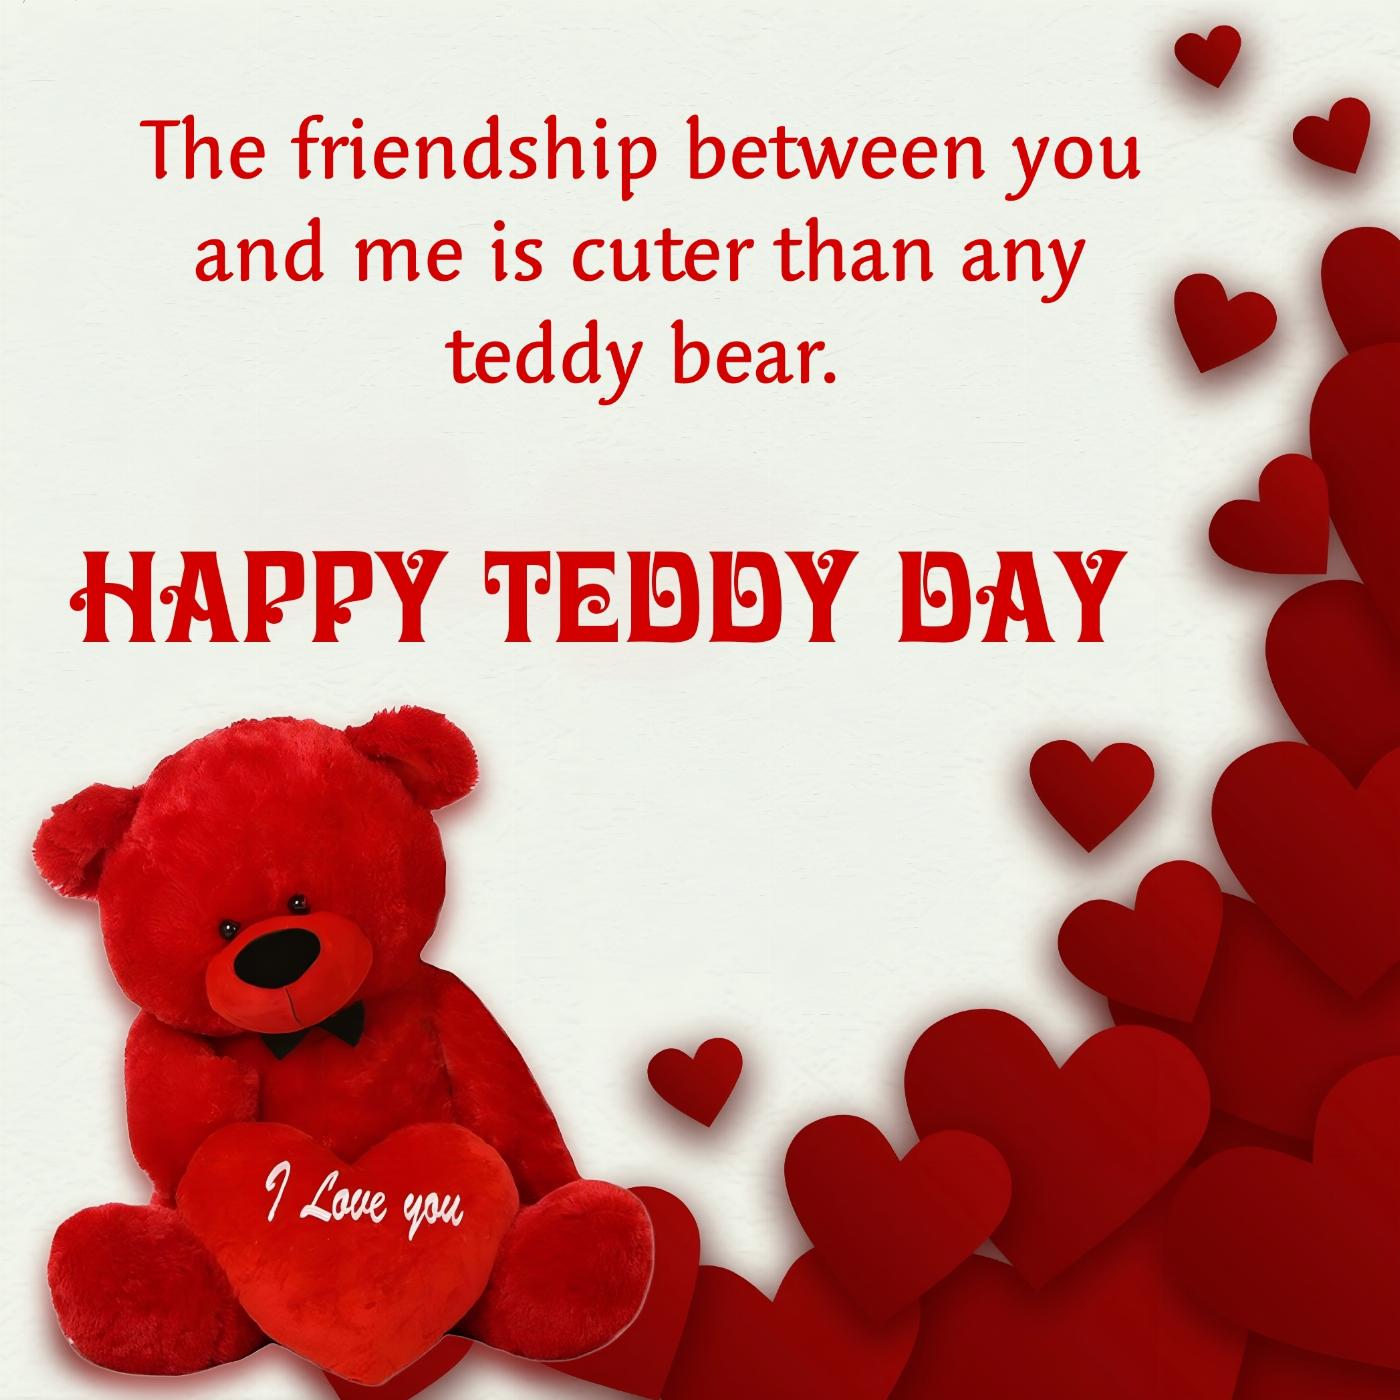 The friendship between you and me is cuter than any teddy bear